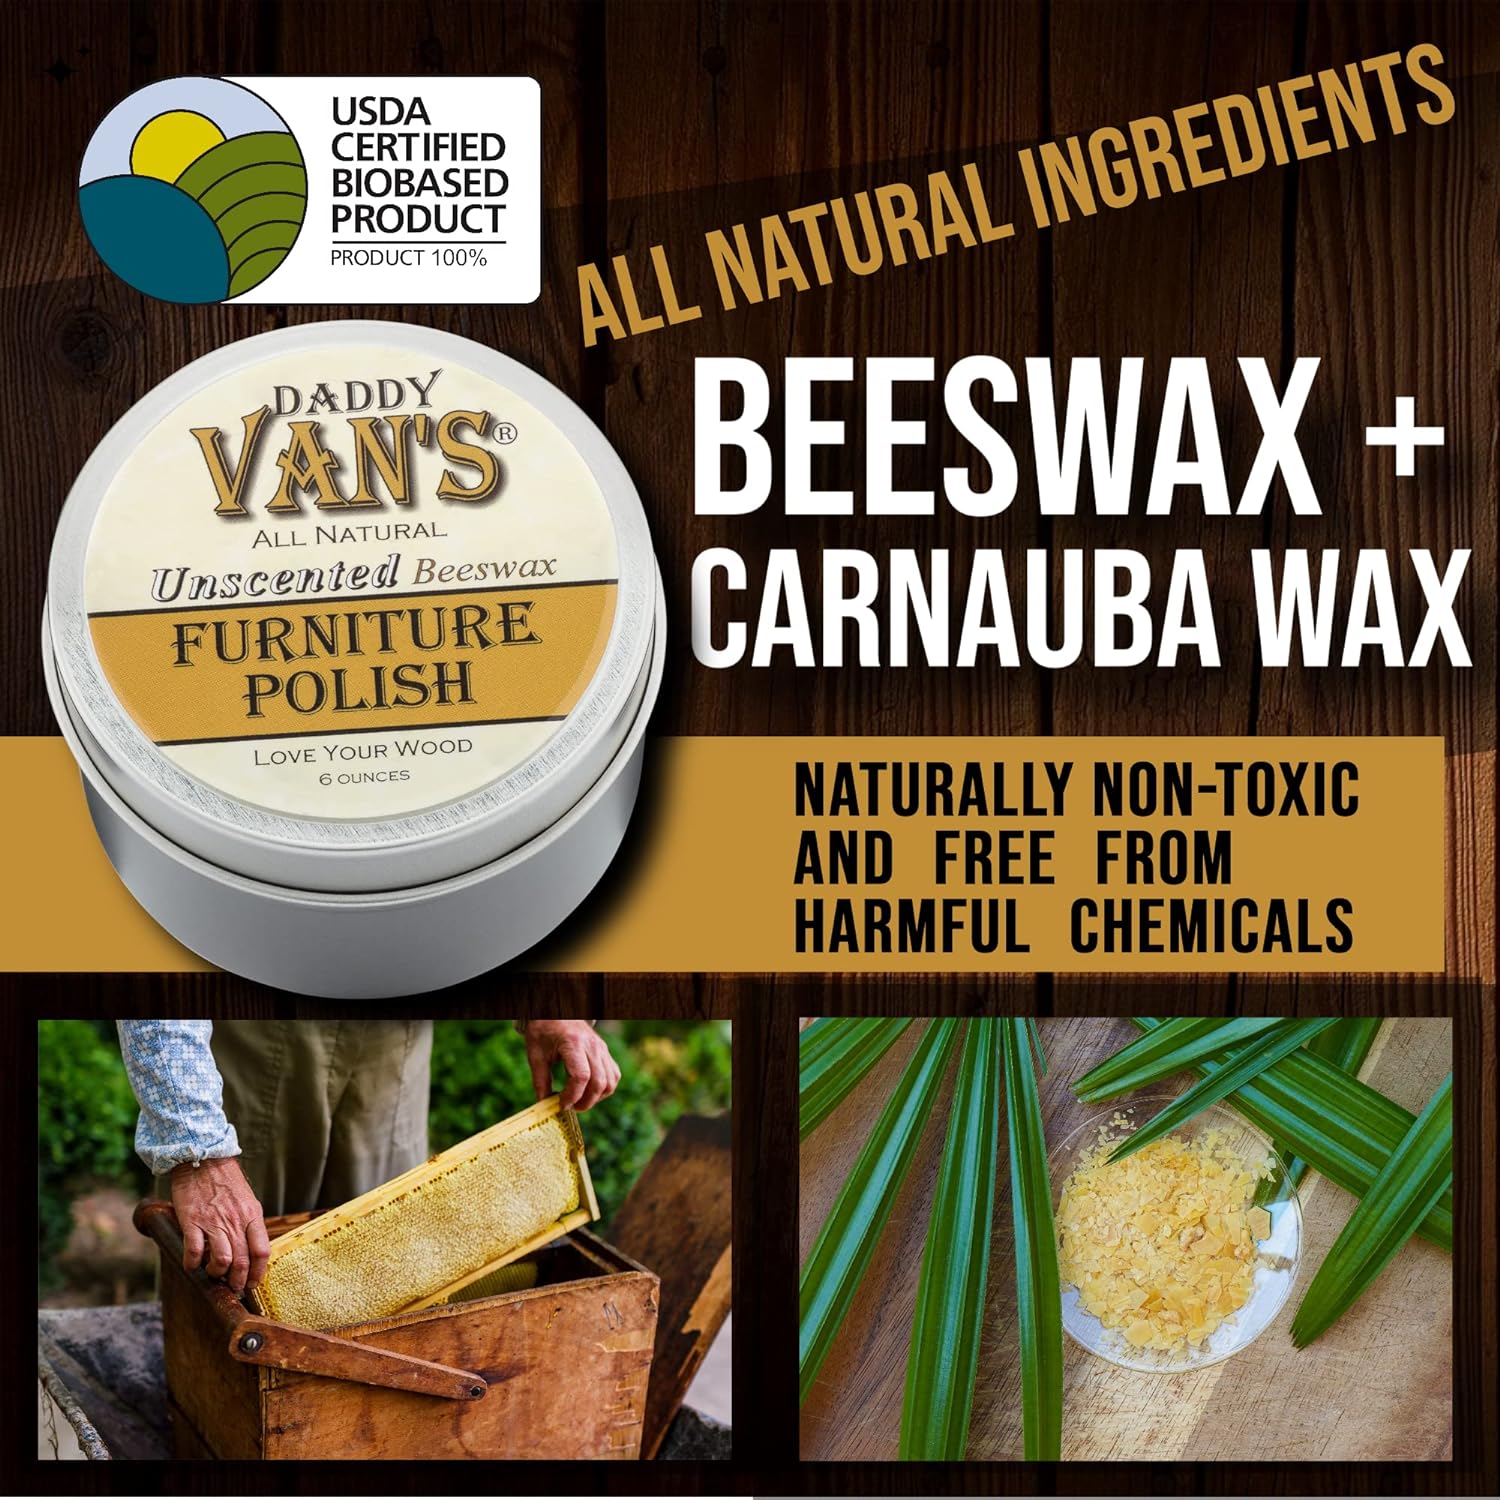 Daddy Van's All Natural Unscented Beeswax Furniture Polish - Food Safe Wood Conditioning Salve Nourishes and Protects Furniture, Cabinets, Antiques and Butcher Block : Health & Household